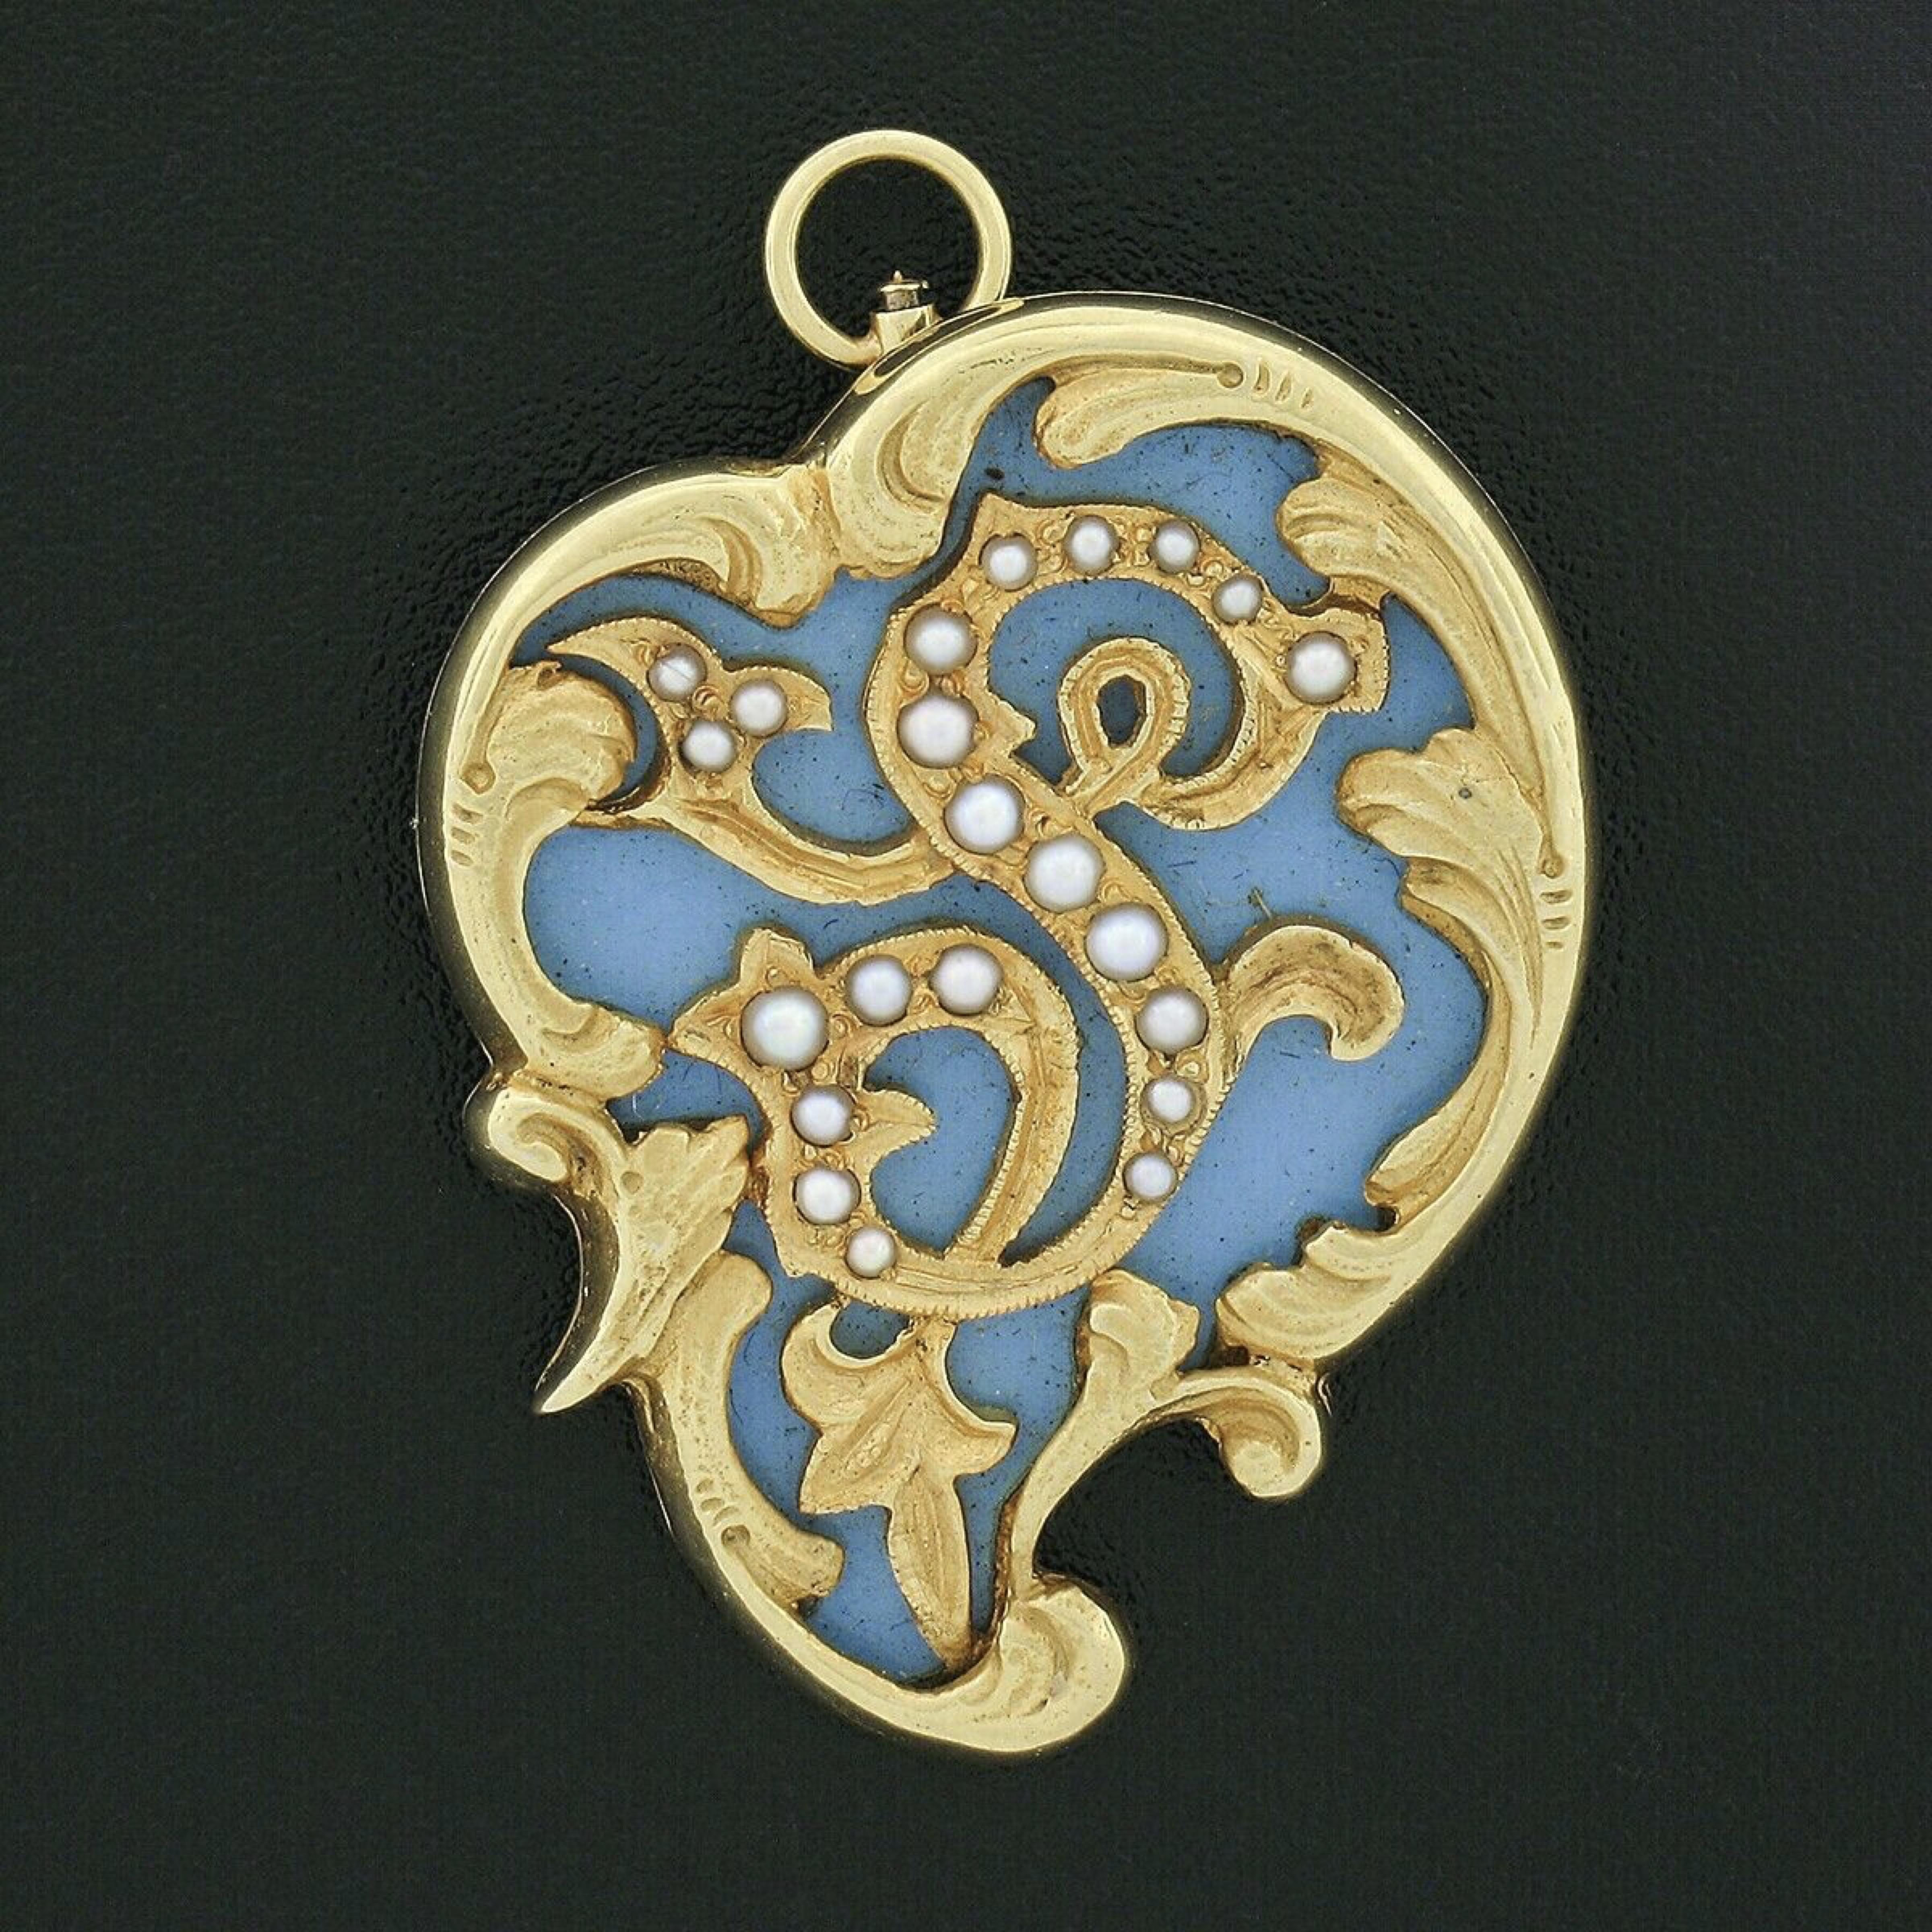 Here we have an antique brooch or pendant that was crafted in the 1910's from solid 14k yellow gold. This incredible piece features a fine turquoise that is inlaid set, showing a beautiful blue color. The stone acts as the perfect background to the